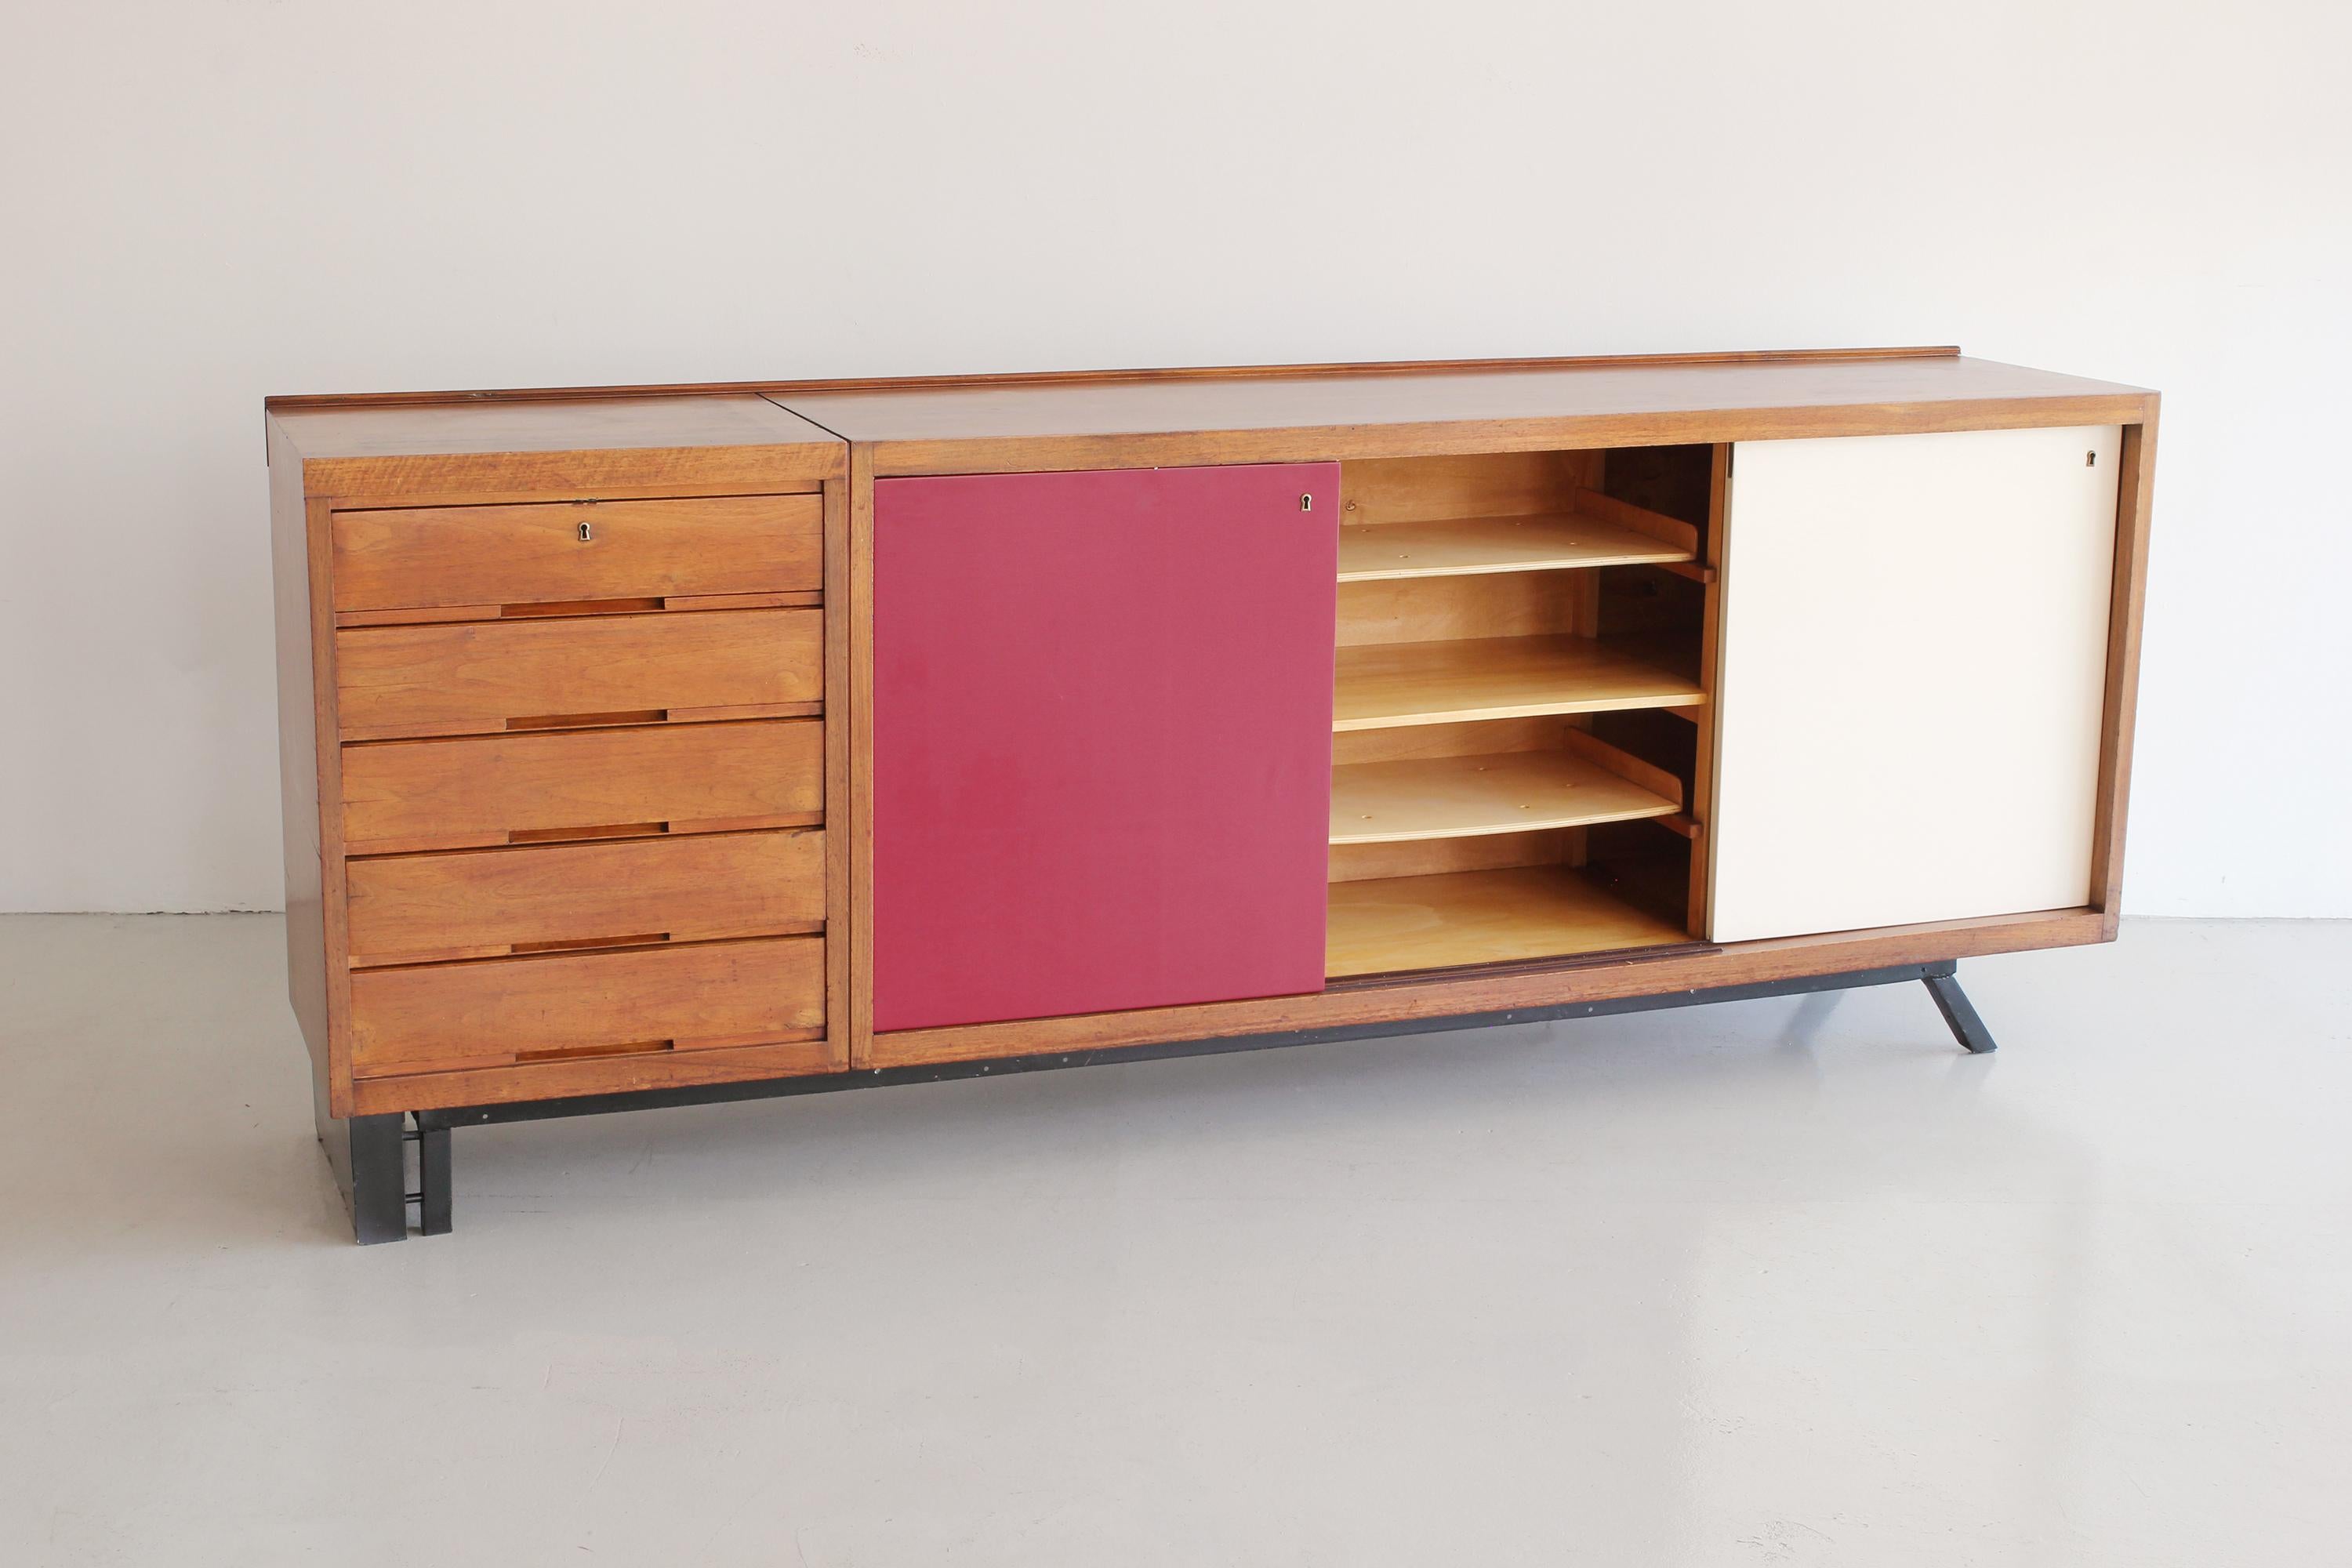 Incredible Italian sideboard in the style of Charlotte Perriand with wood drawers, sliding doors and iron asymmetrical base.